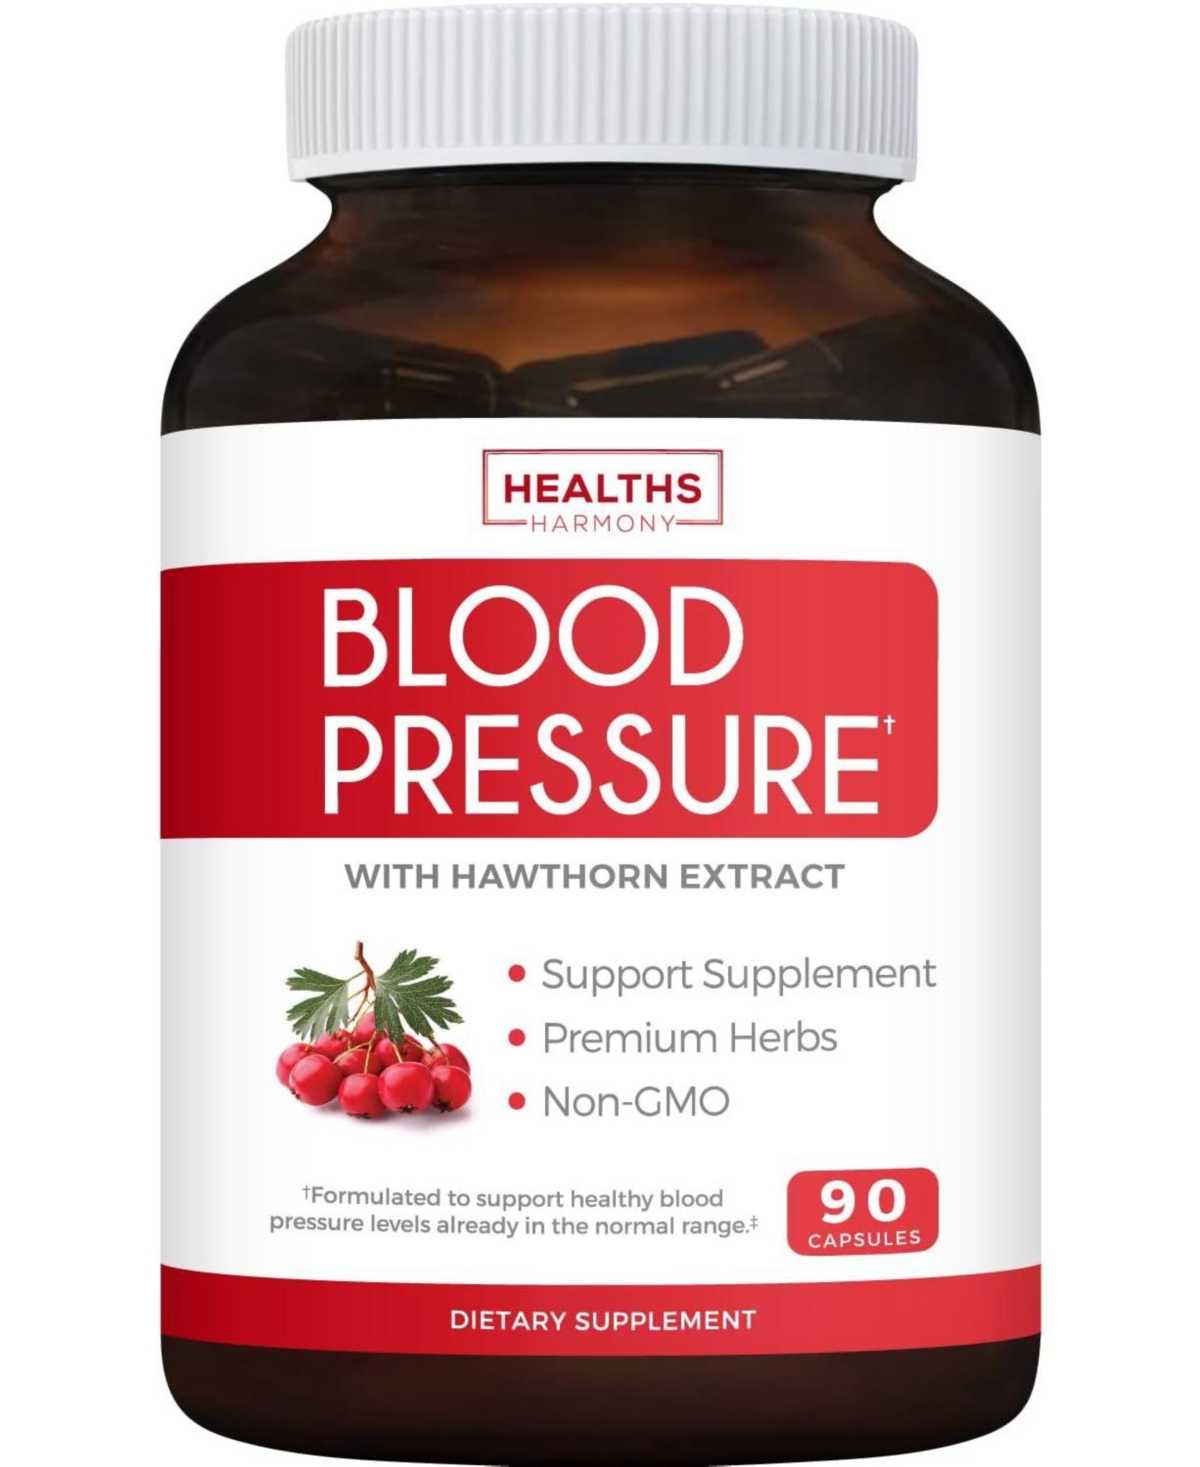 Blood Pressure Support Supplement Non-gmo Premium Natural Herbs, Vitamins & Berries - High Dosage of Hawthorn Berry Extract – Supports